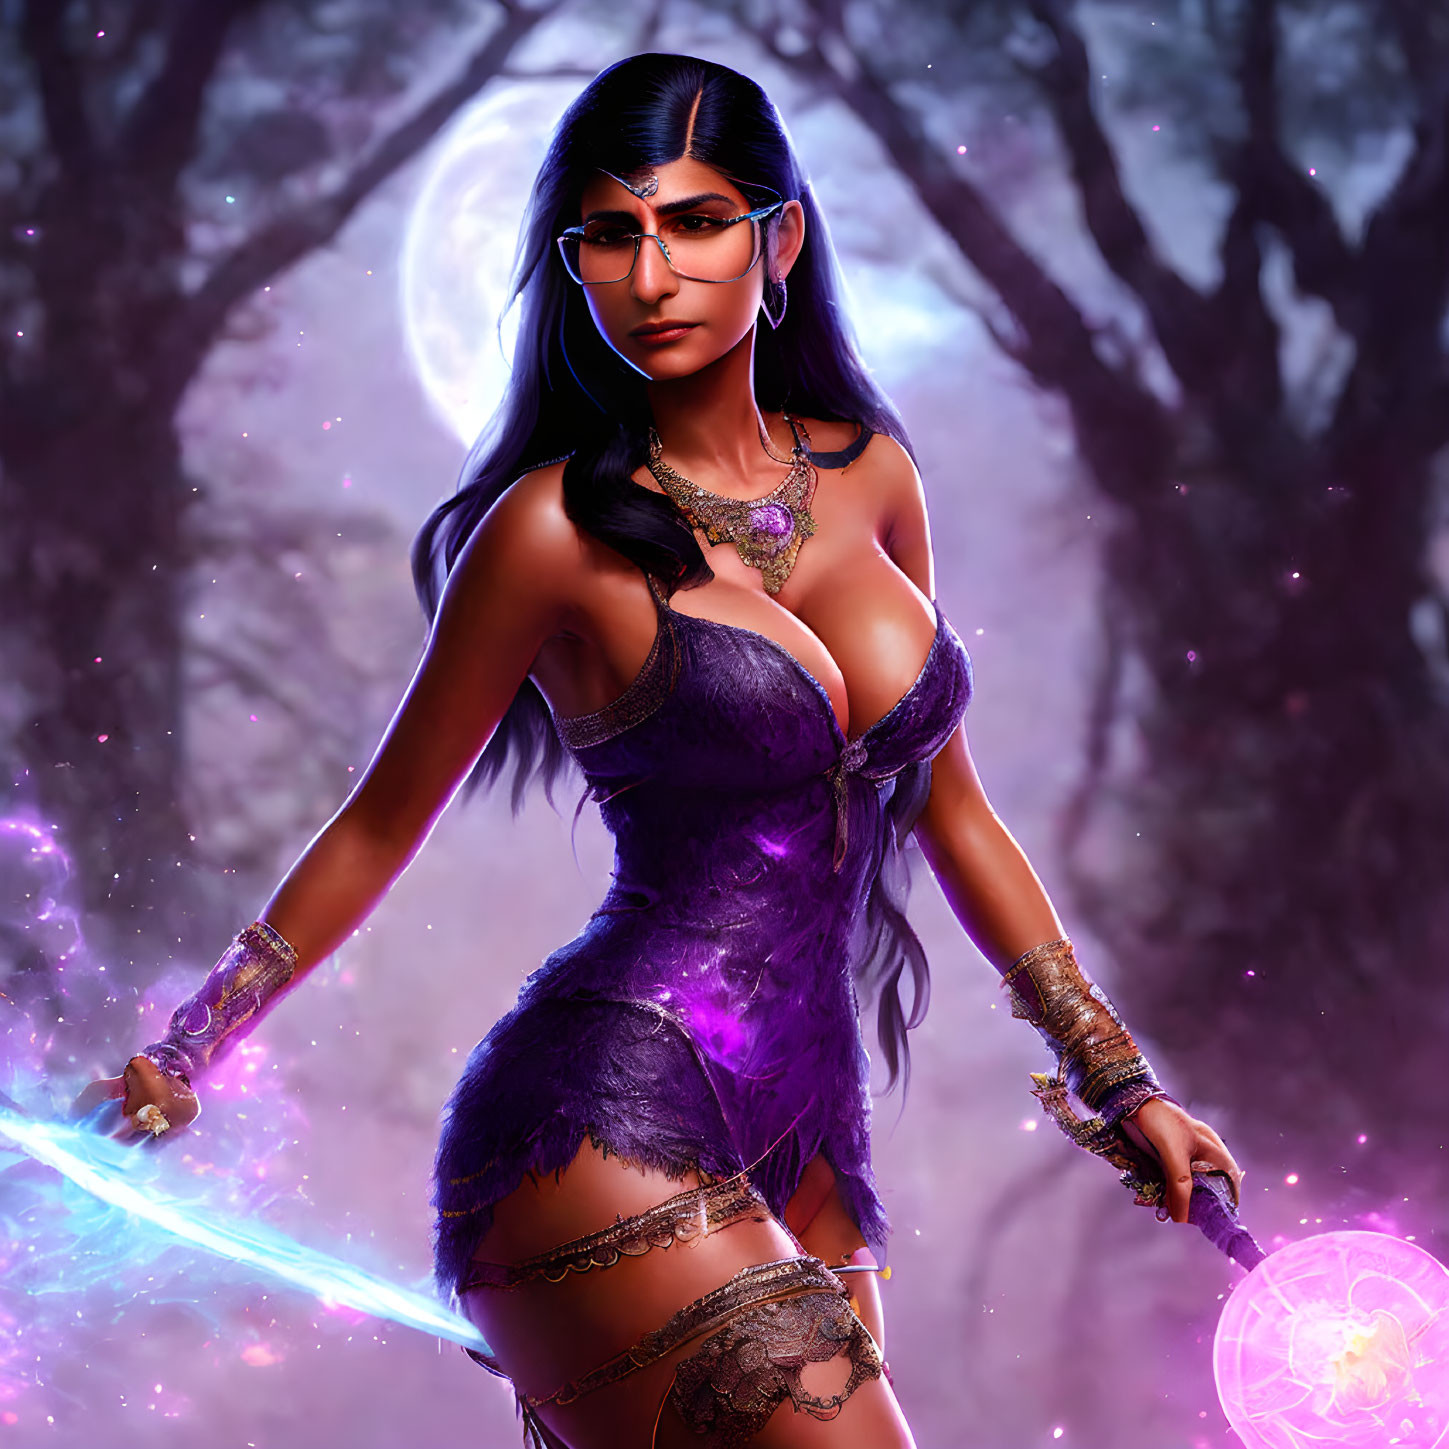 Fantasy Illustration of Woman in Glowing Purple Attire with Mystical Weapons